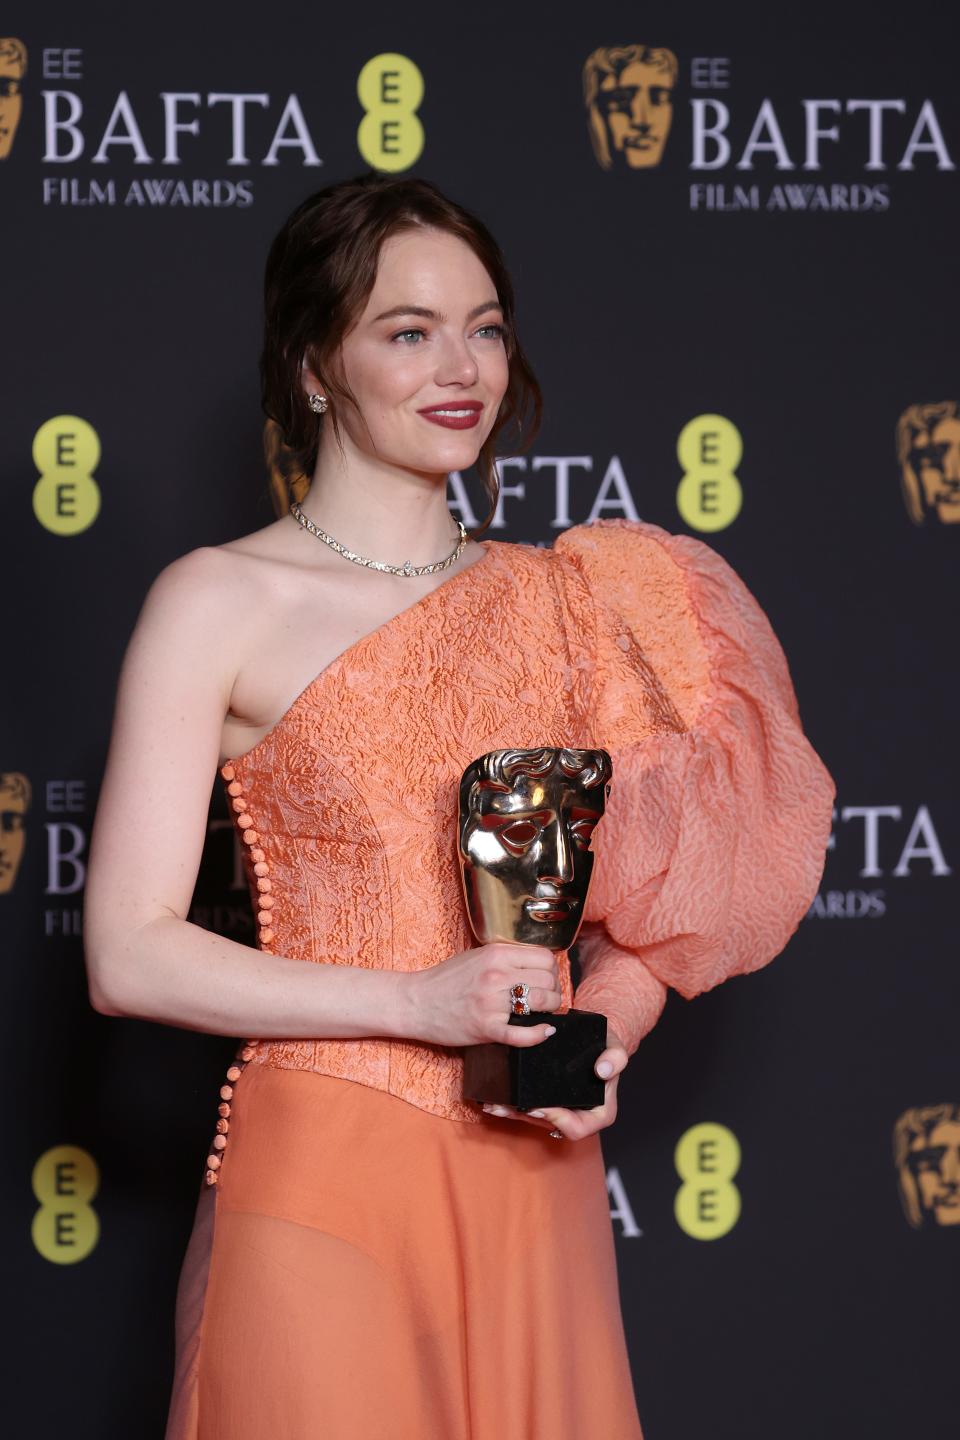 Emma Stone was named best actress for playing the wild and spirited Bella Baxter in "Poor Things," which won prizes for visual effects, production design, makeup and hair and costume design.